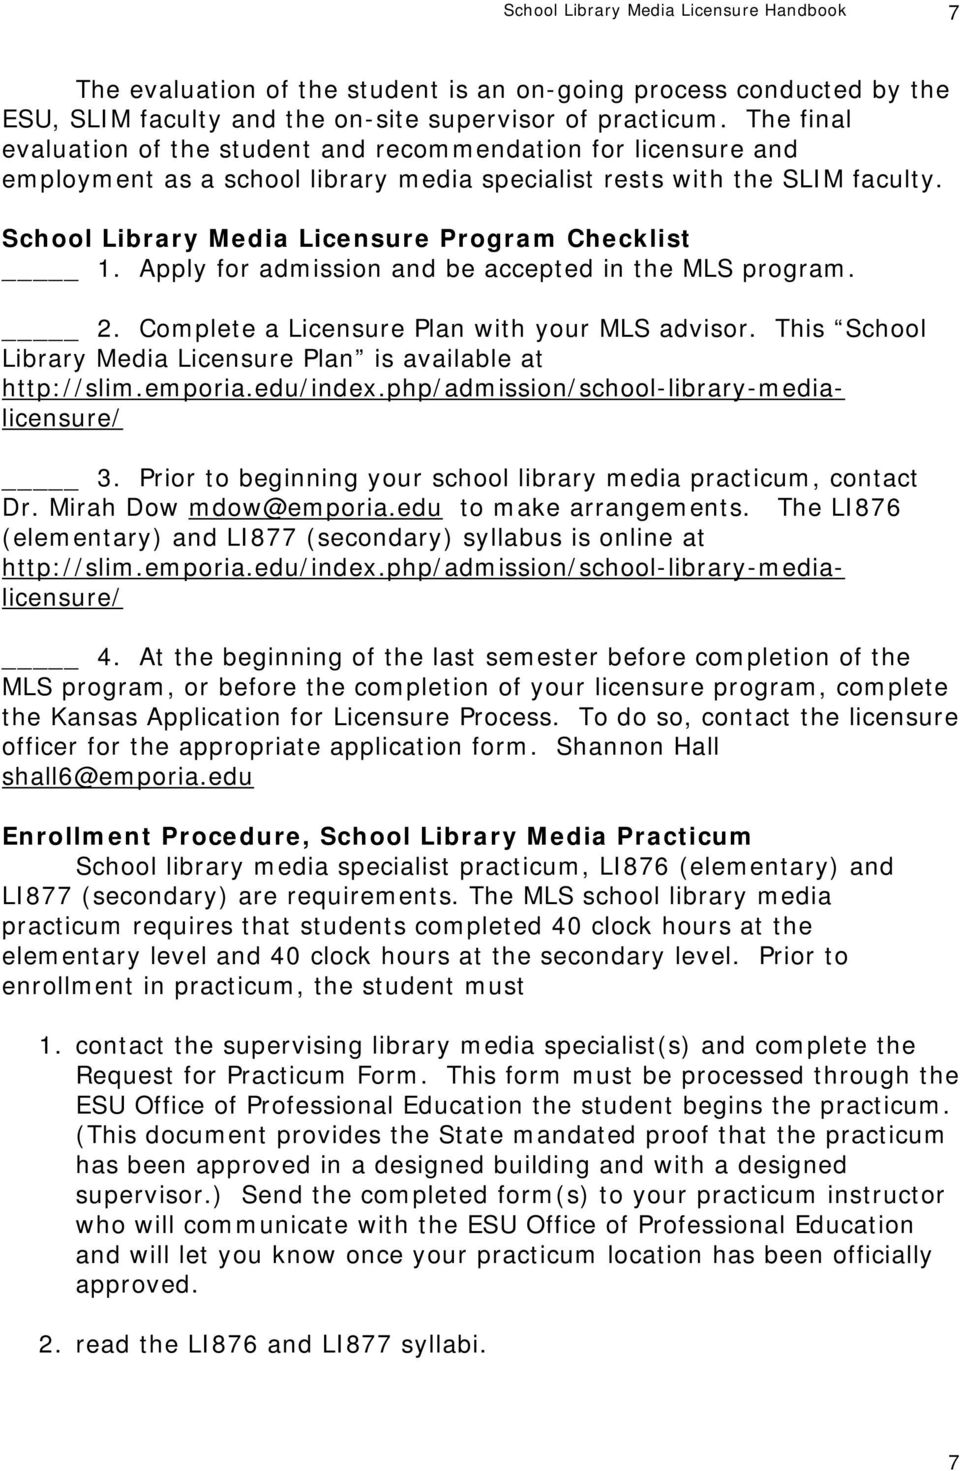 School Library Media Licensure Program Checklist 1. Apply for admission and be accepted in the MLS program. 2. Complete a Licensure Plan with your MLS advisor.